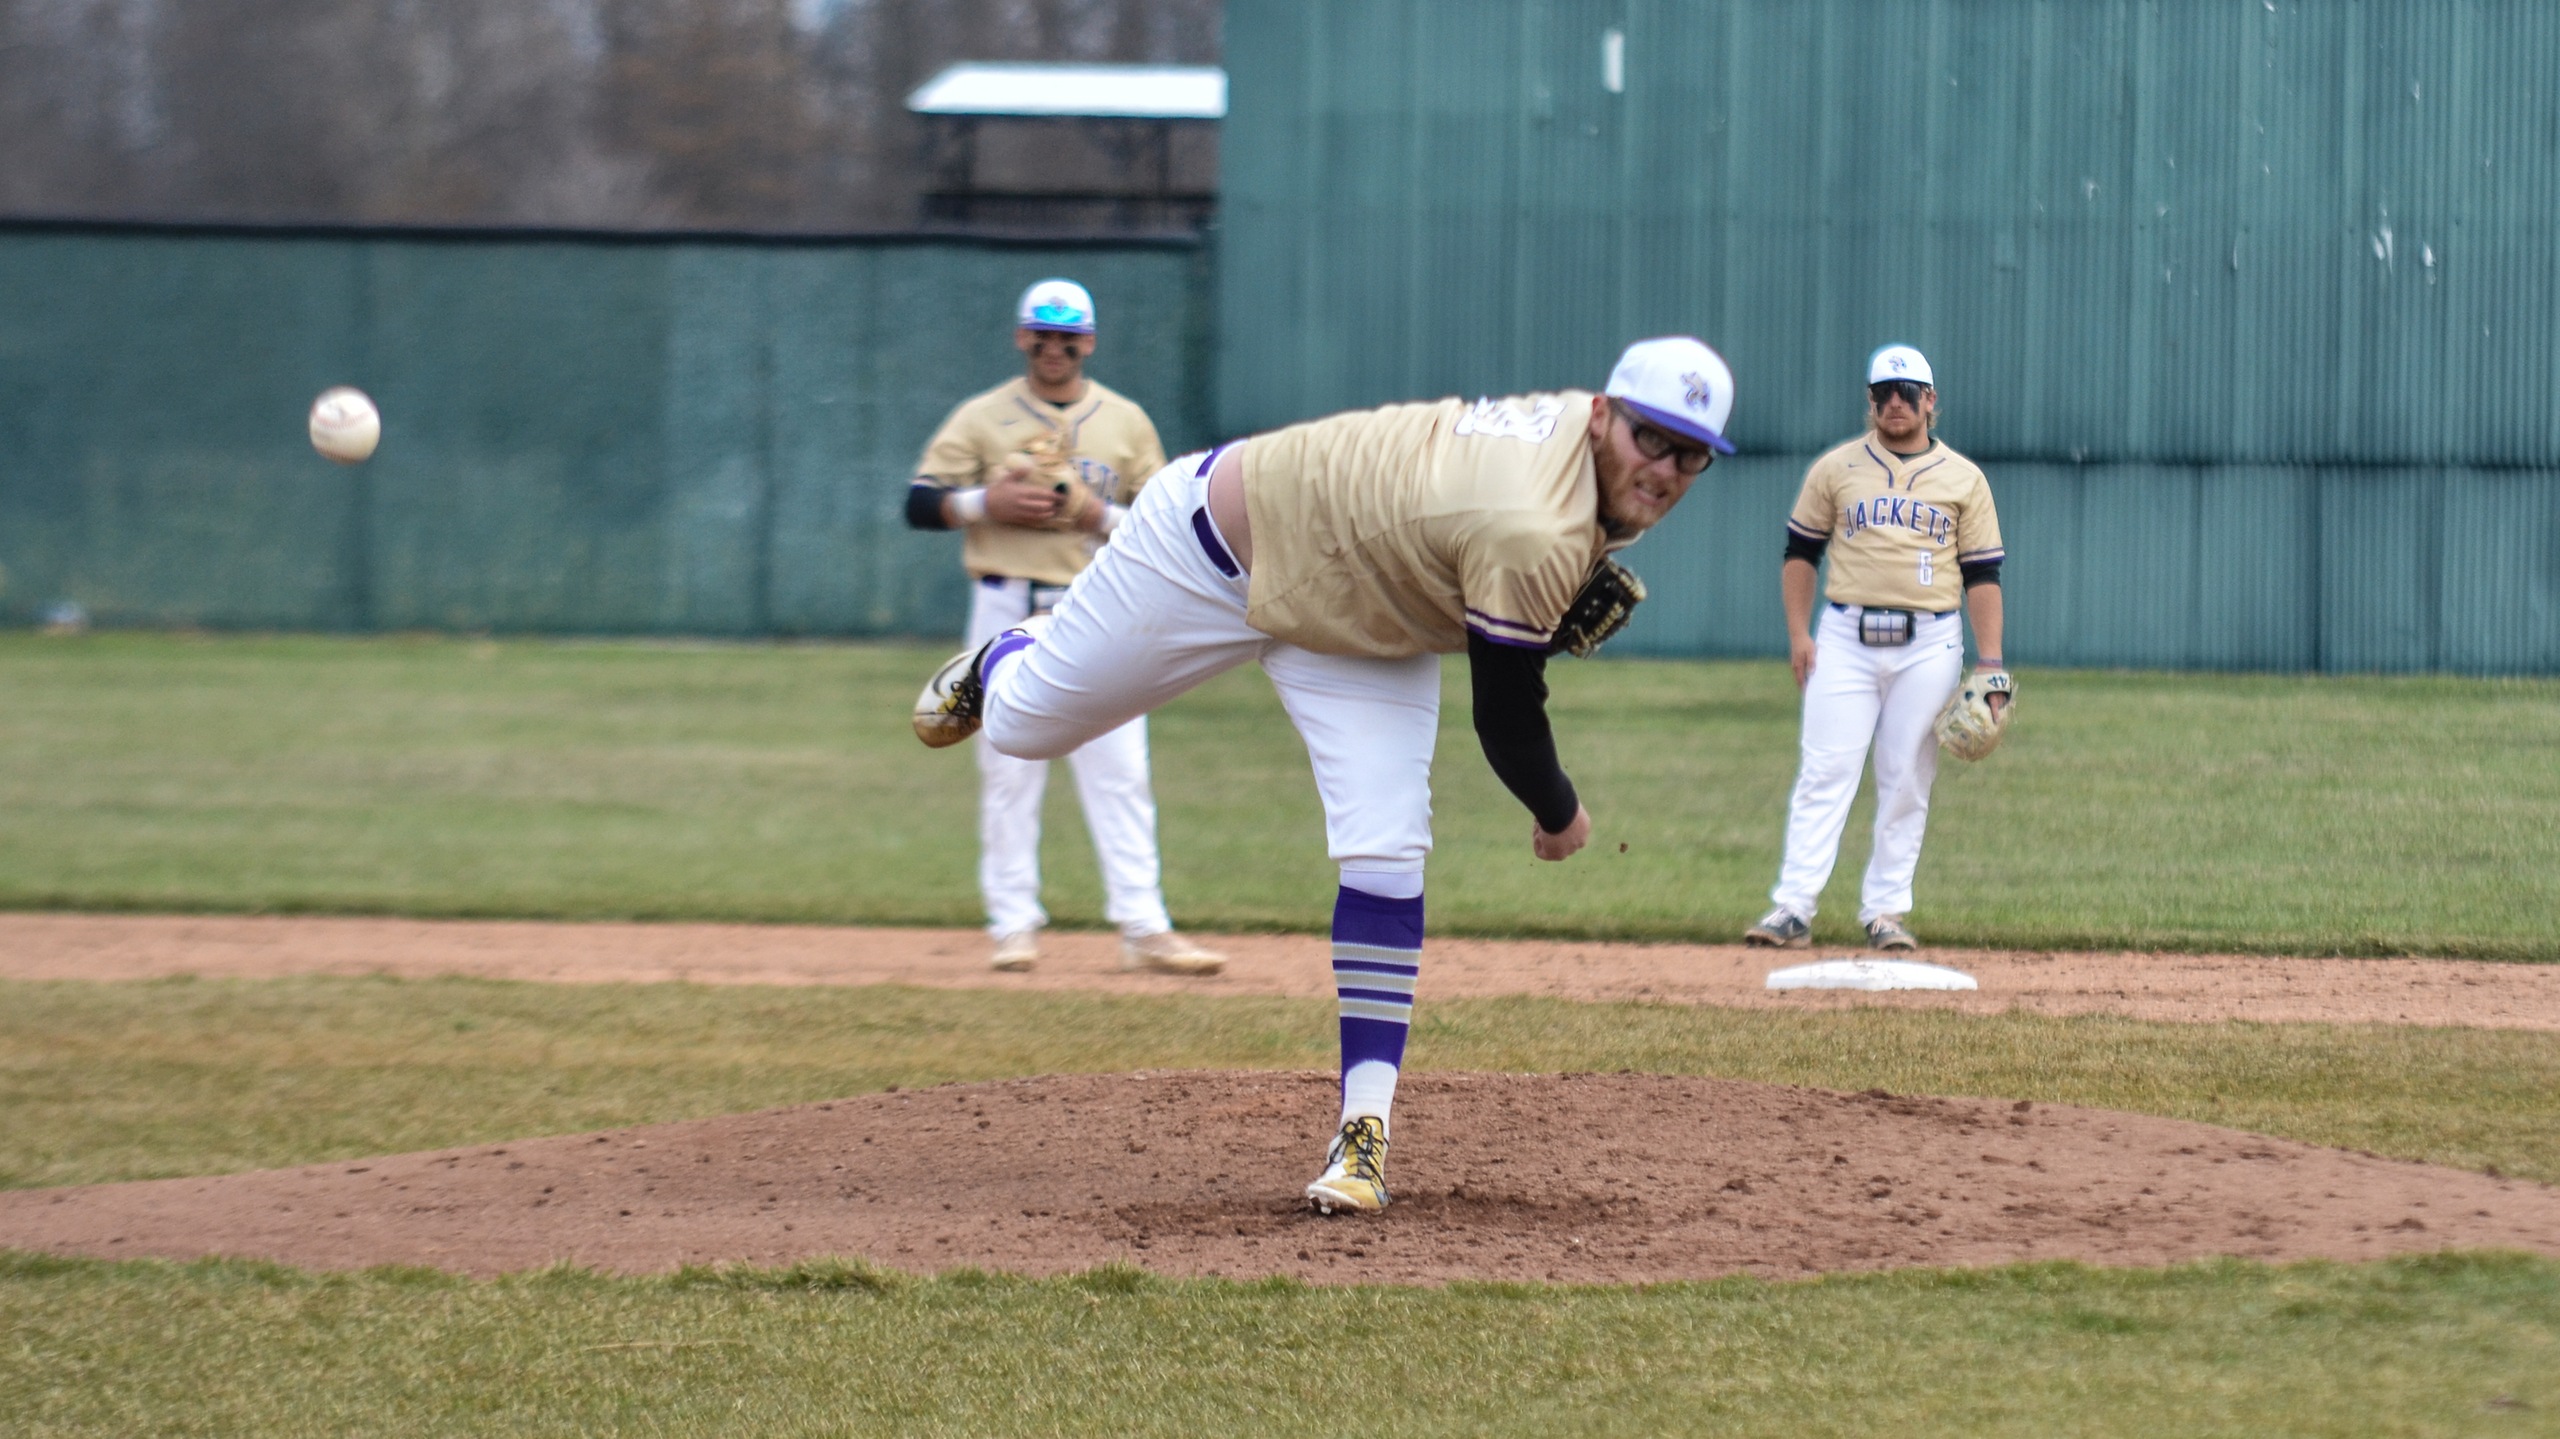 Defiance dealt another walk-off defeat to close series at Earlham